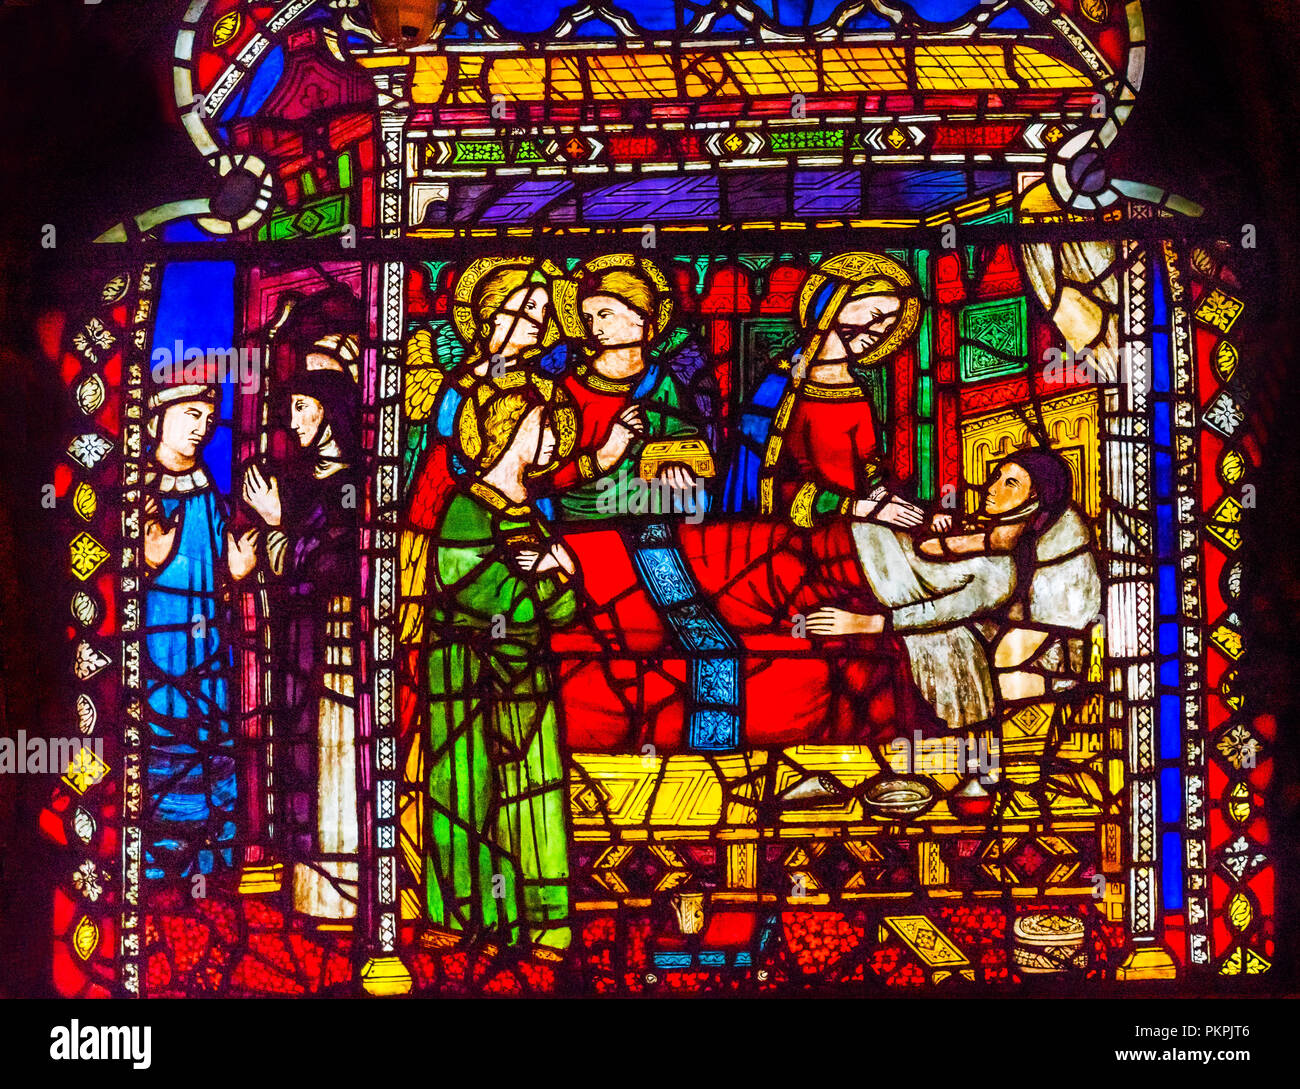 Virgin Mary Deathbed Stained Glass Window Orsanmichele Church Florence Italy. Church and stained glass from 1400s. Stock Photo